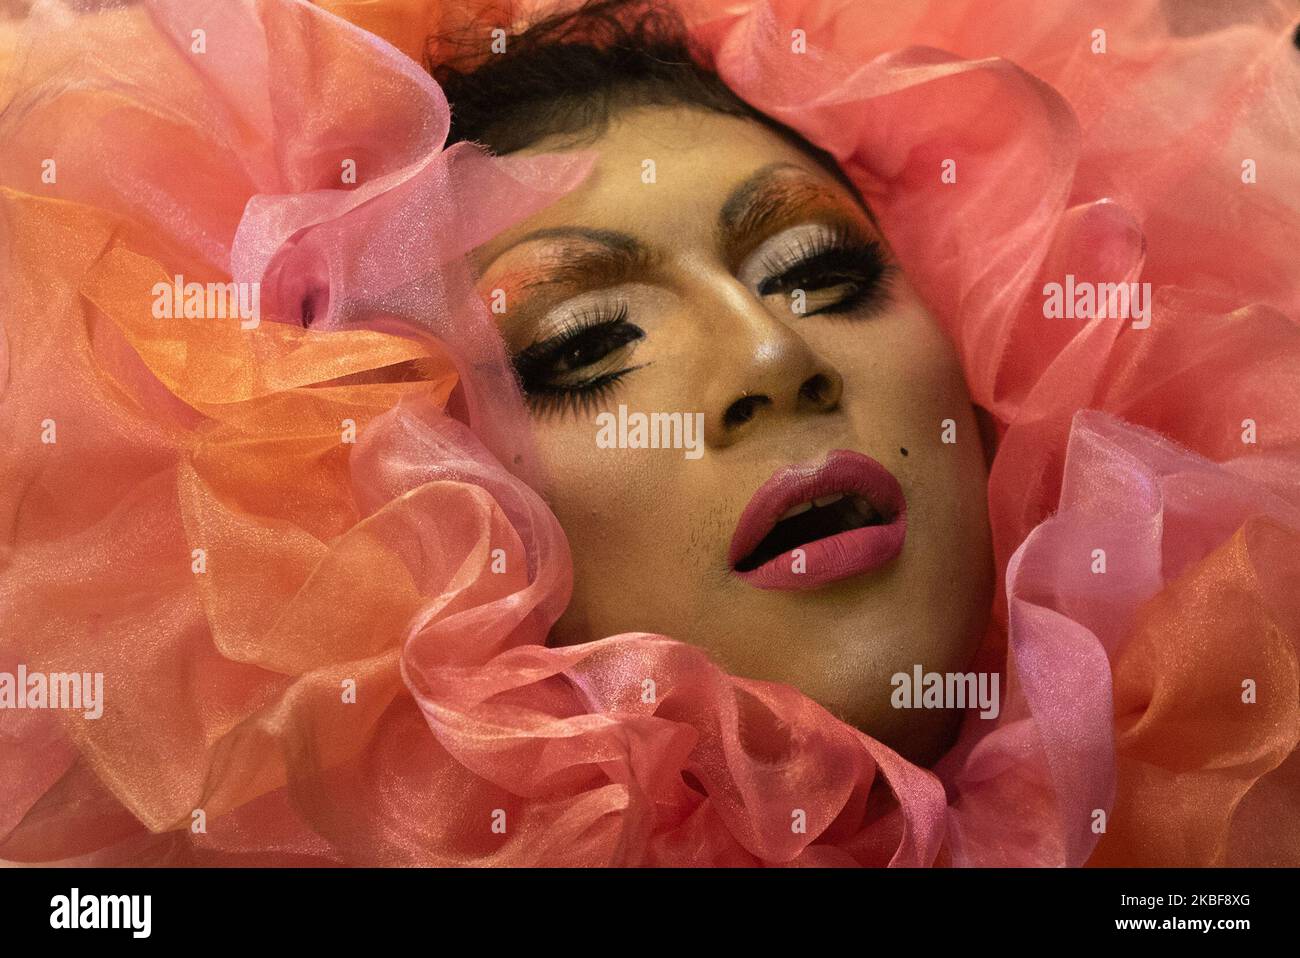 A drag queen poses for photograph during the ”&Proud' LGBT festival in Yangon, Myanmar on 24 January, 2020. (Photo by Shwe Paw Mya Tin/NurPhoto) Stock Photo